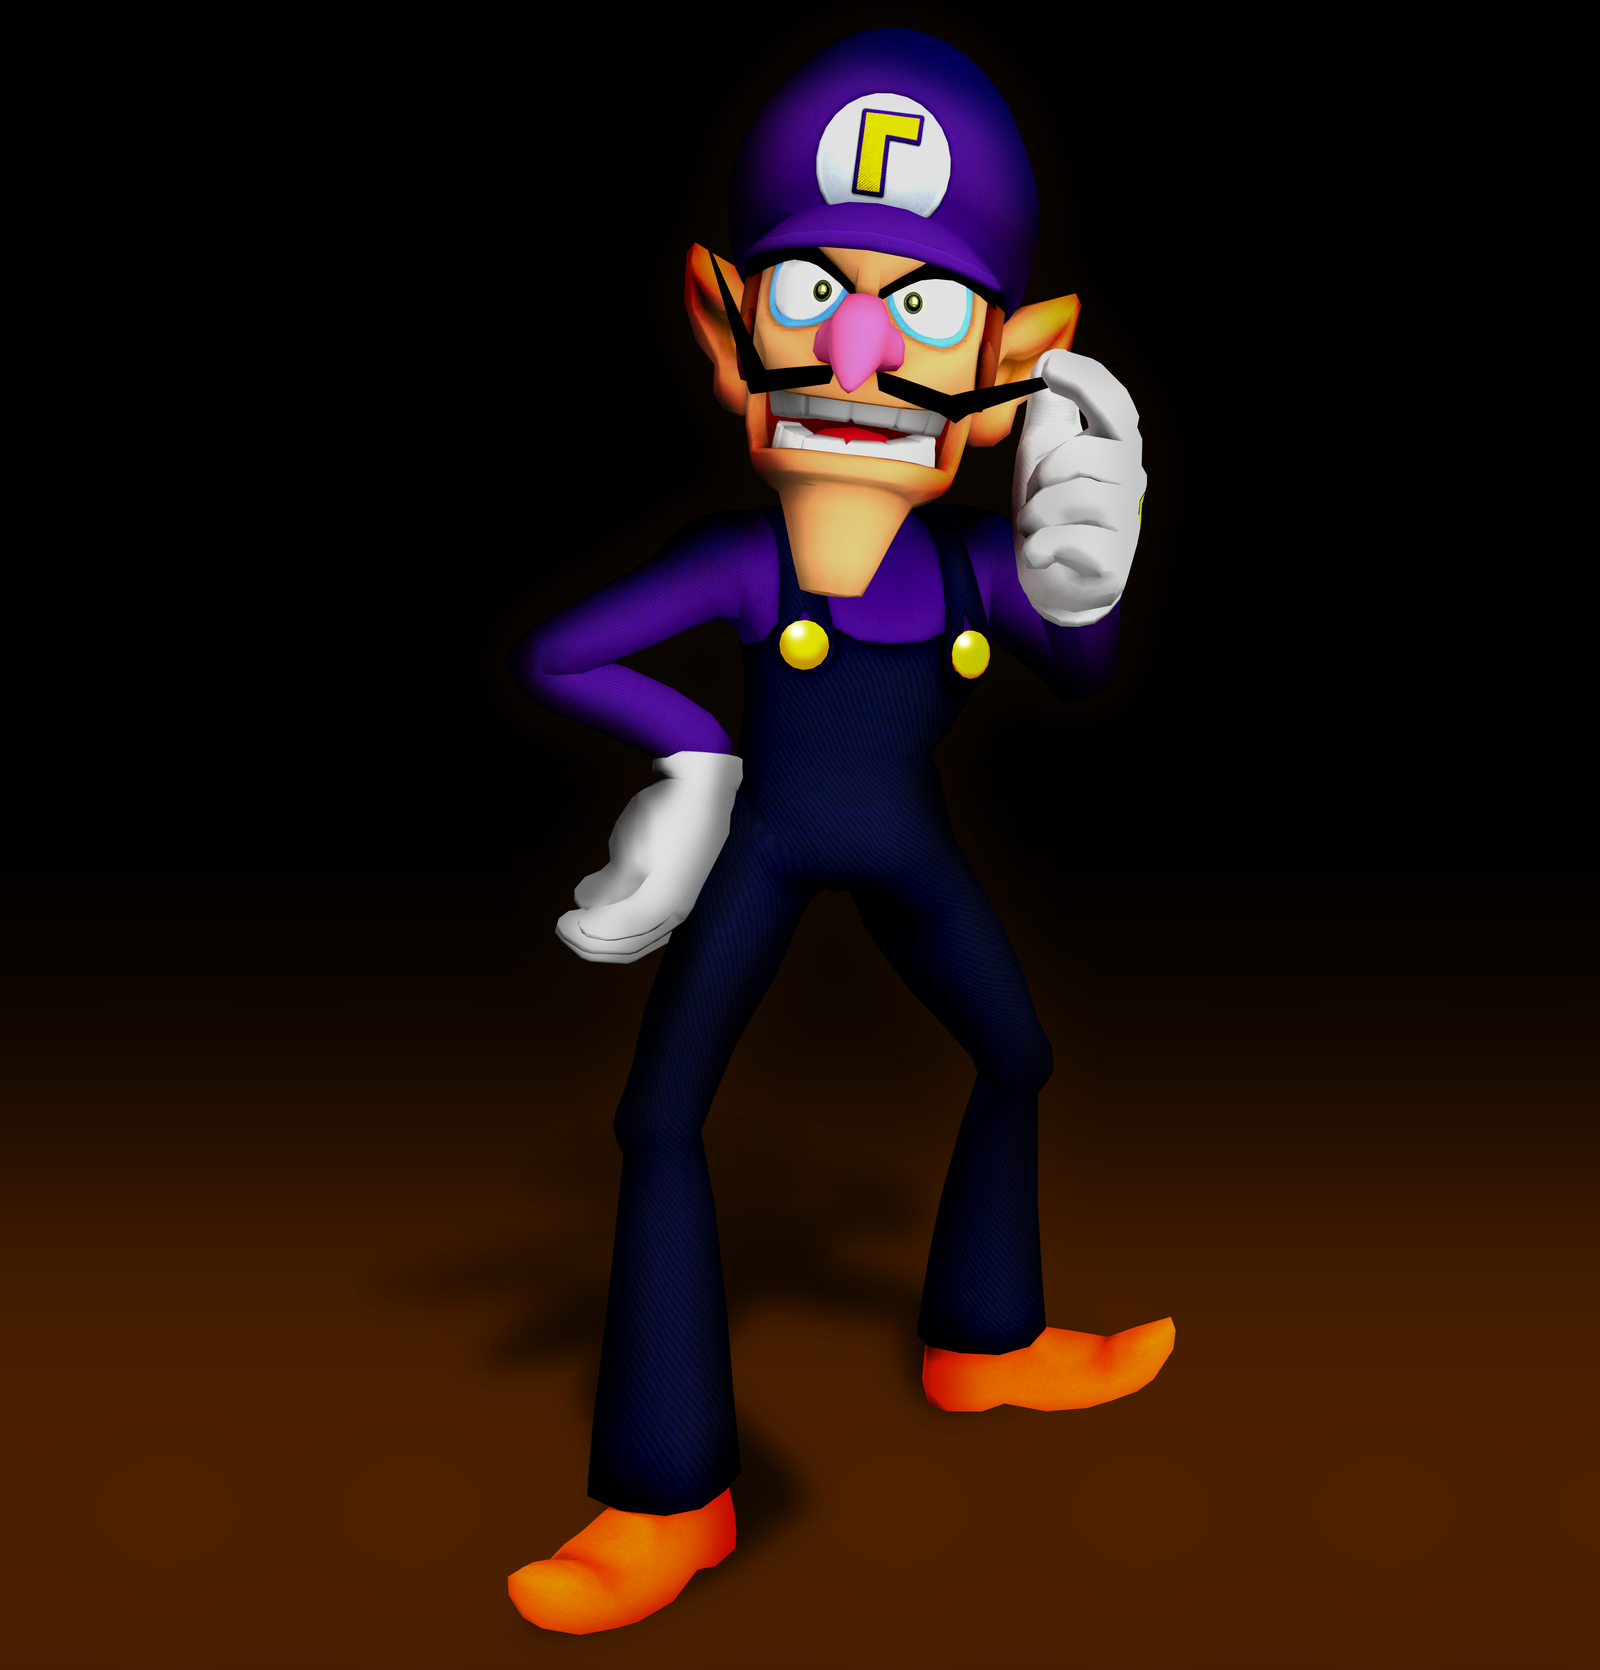 wah__by_fawfulthegreat64-dc8n9b7.png